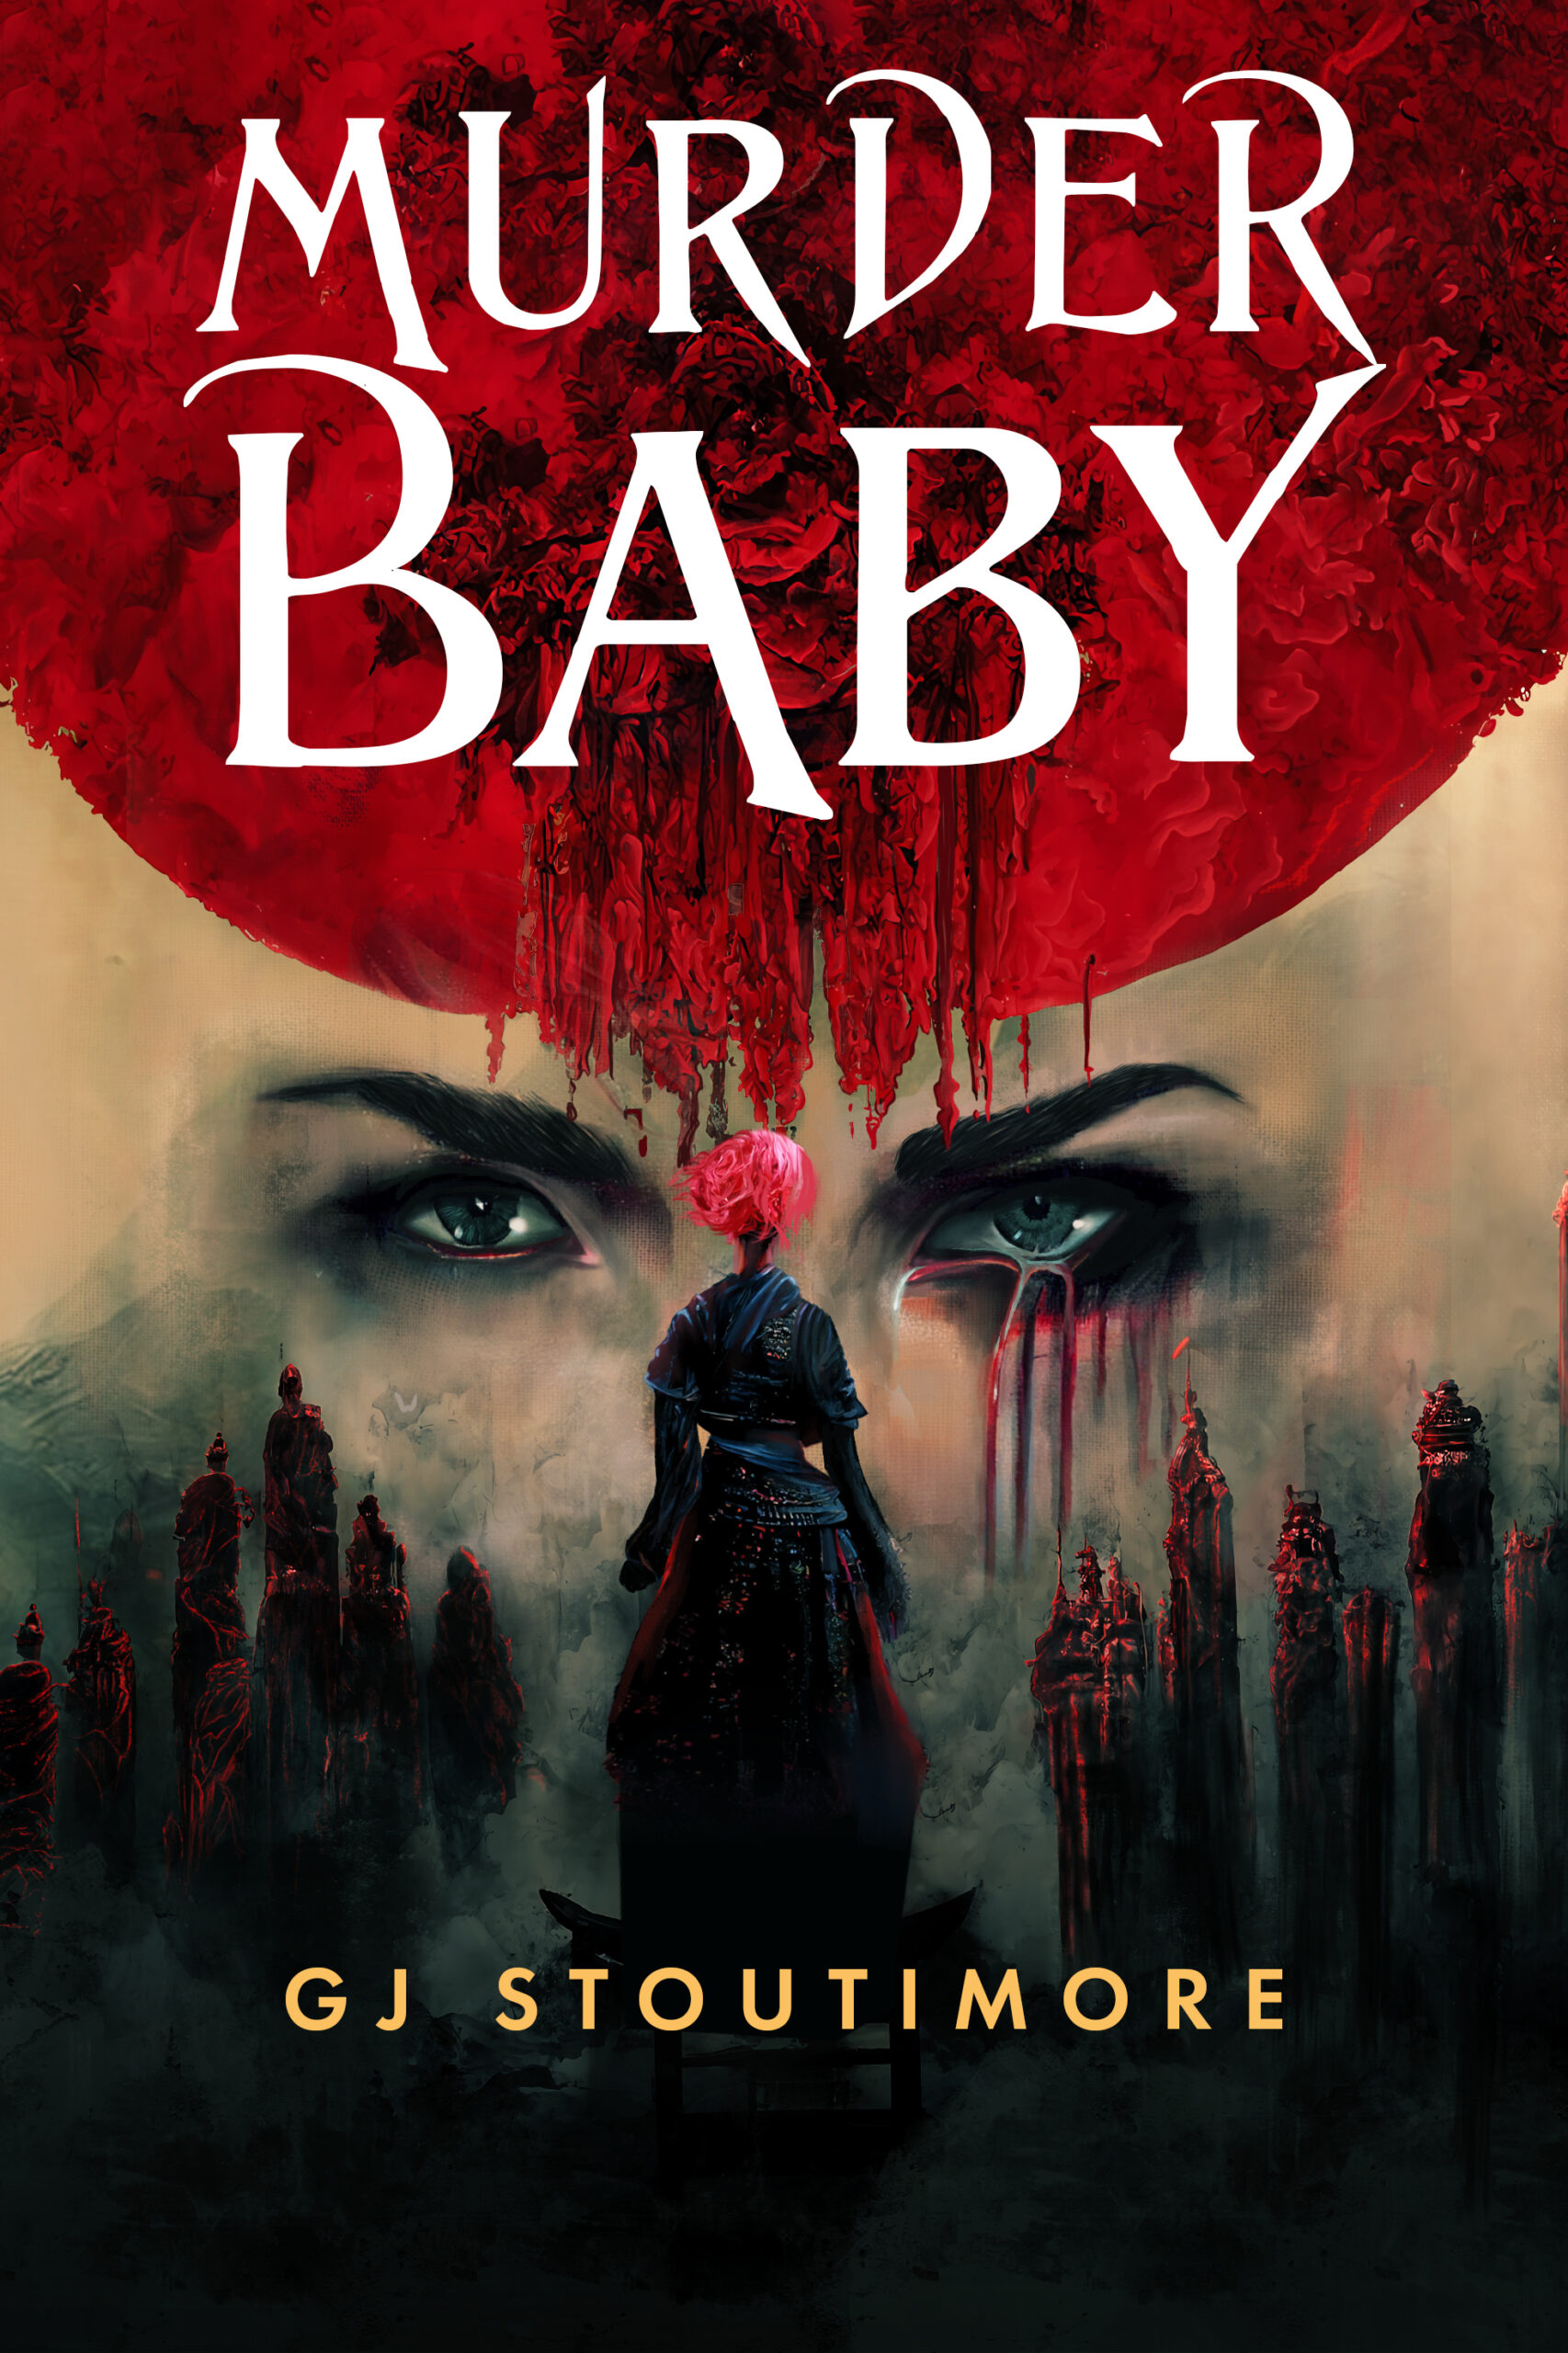 Murder baby by G.J. Stoutimore